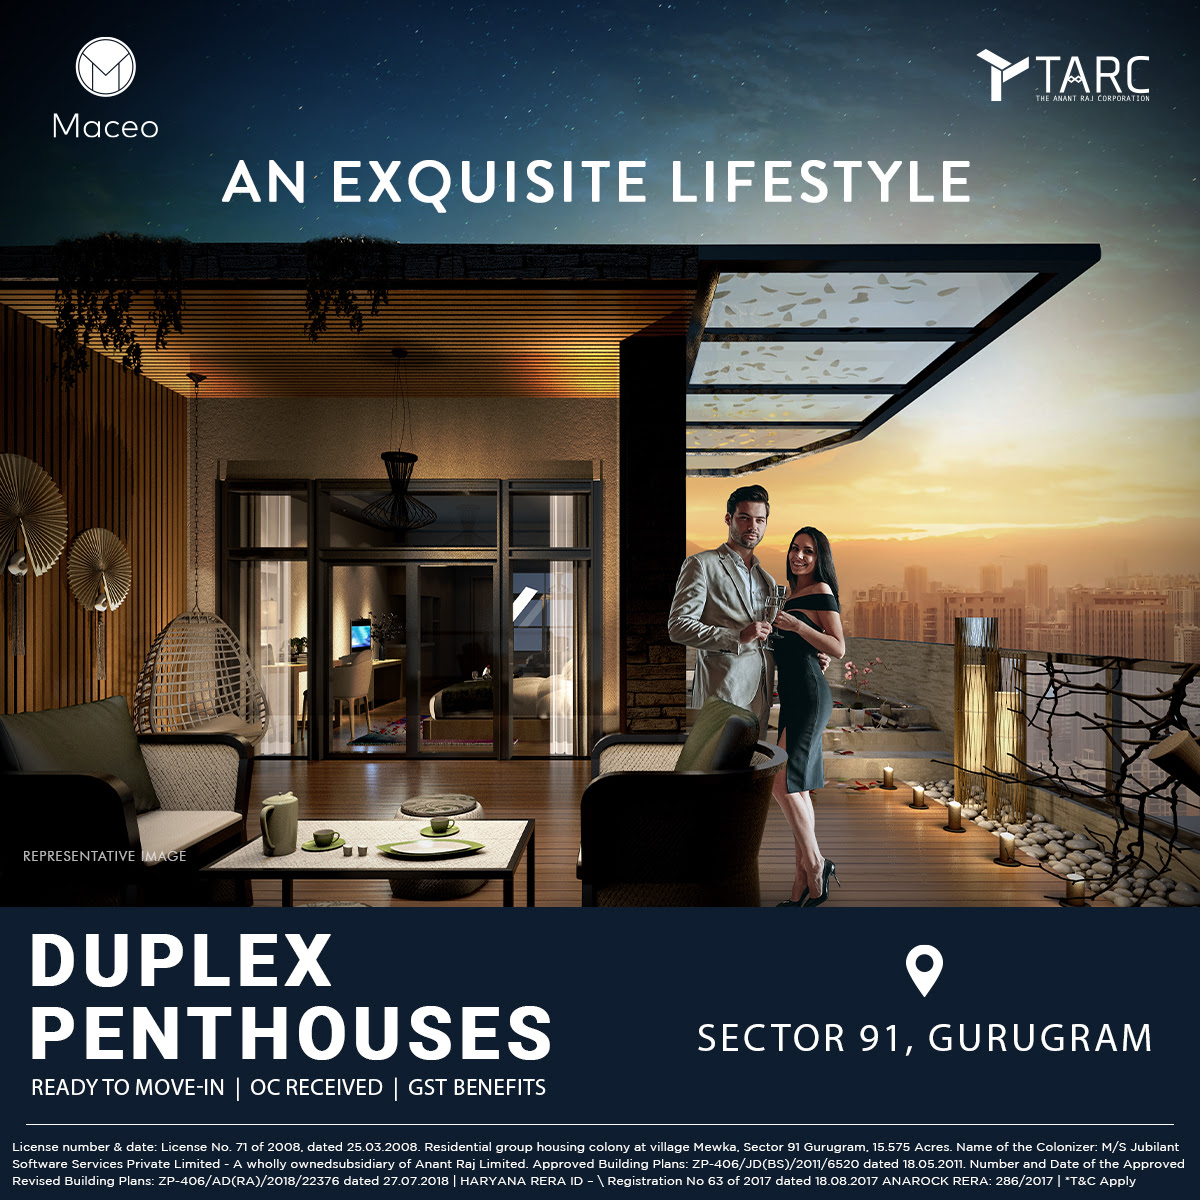 Book RTMI Penthouses & get GST benefits at Tarc Maceo in Sector 91, Gurgaon Update